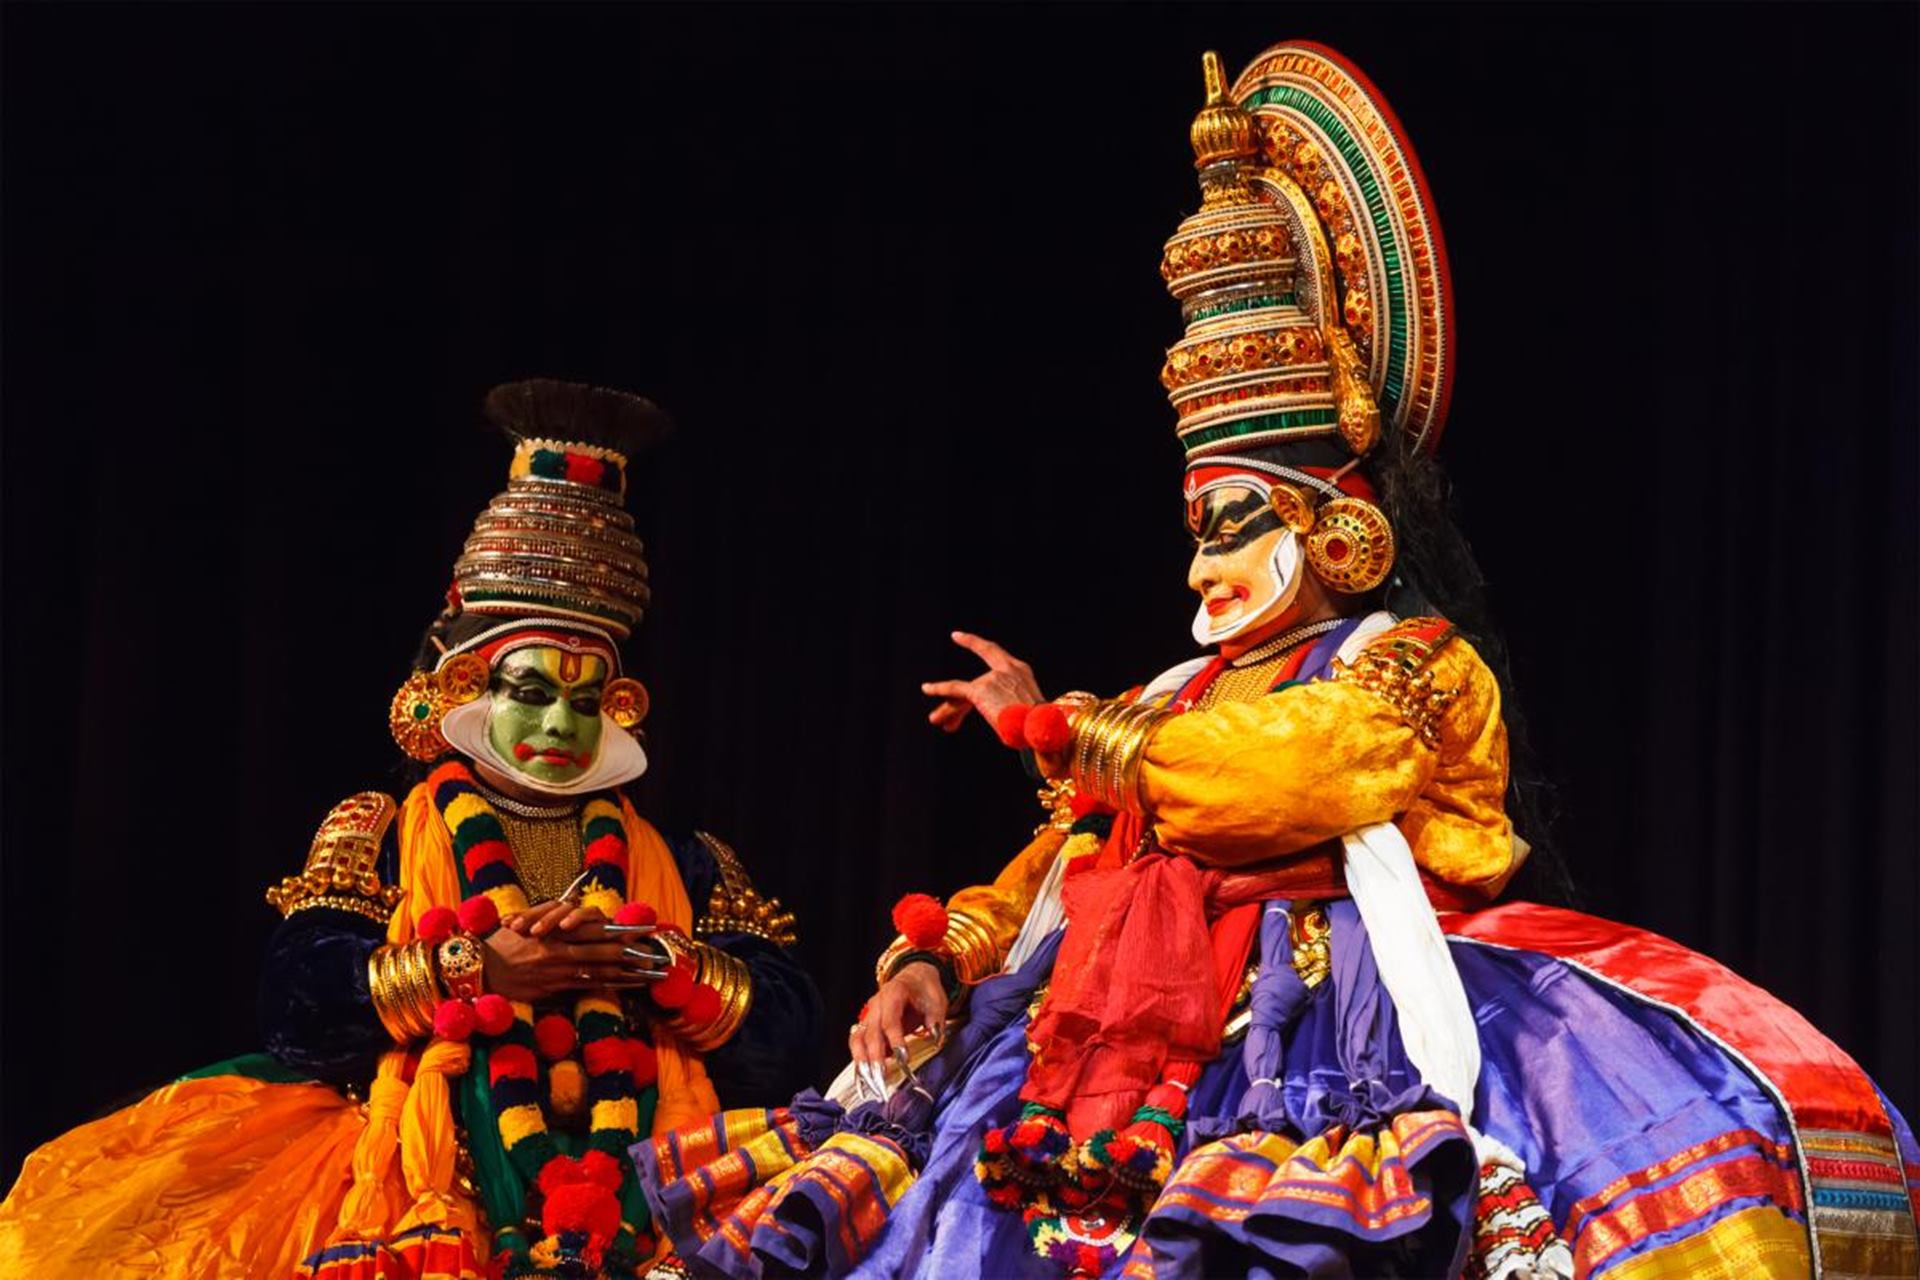 kathakali dance in kerala - places to visit in india before 30